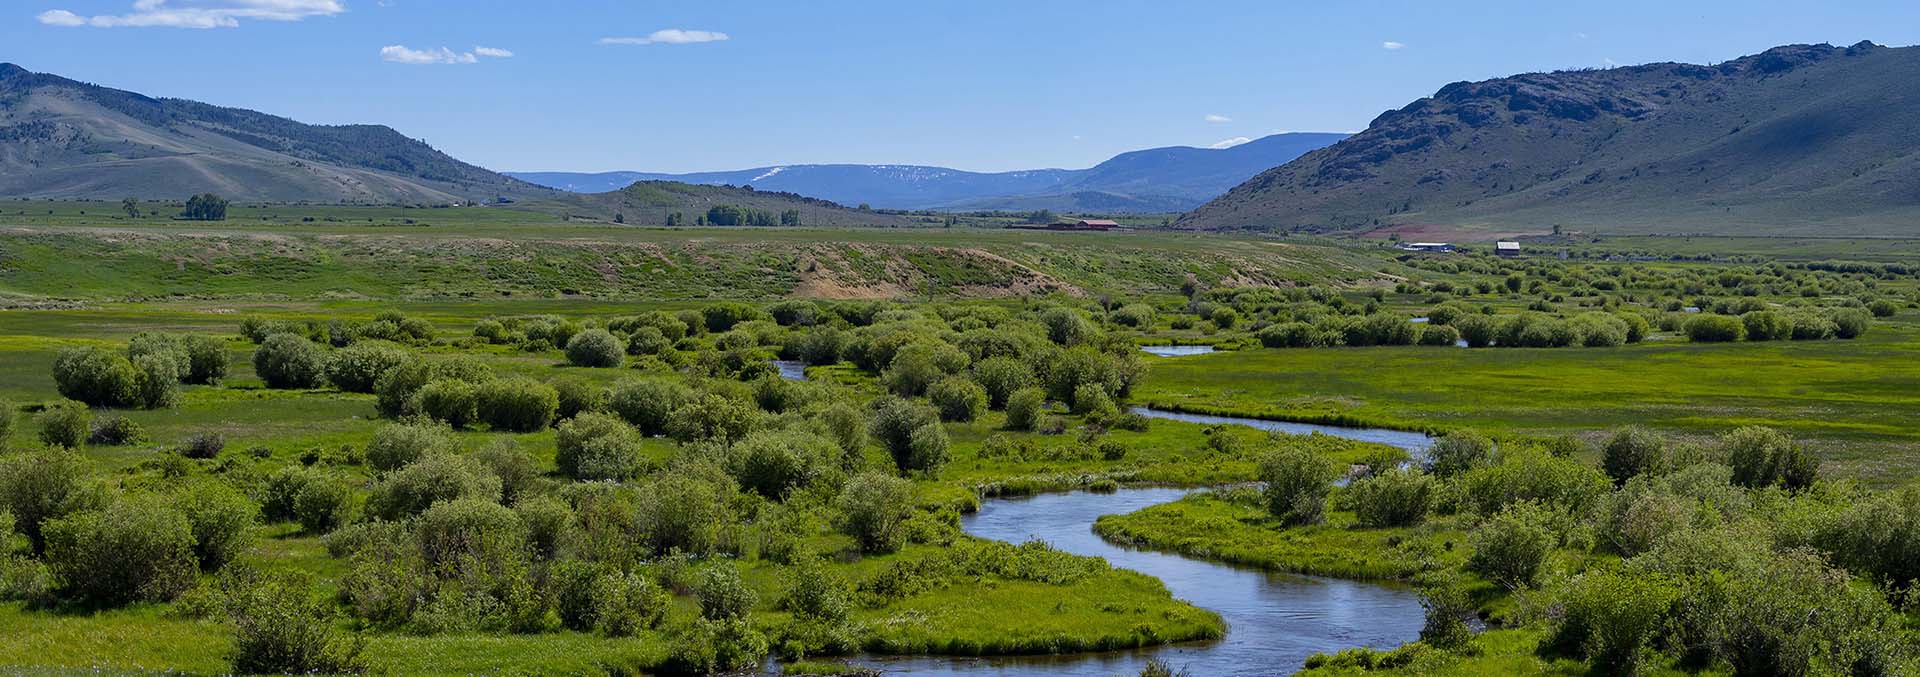 colorado river ranches for sale north fork river ranch